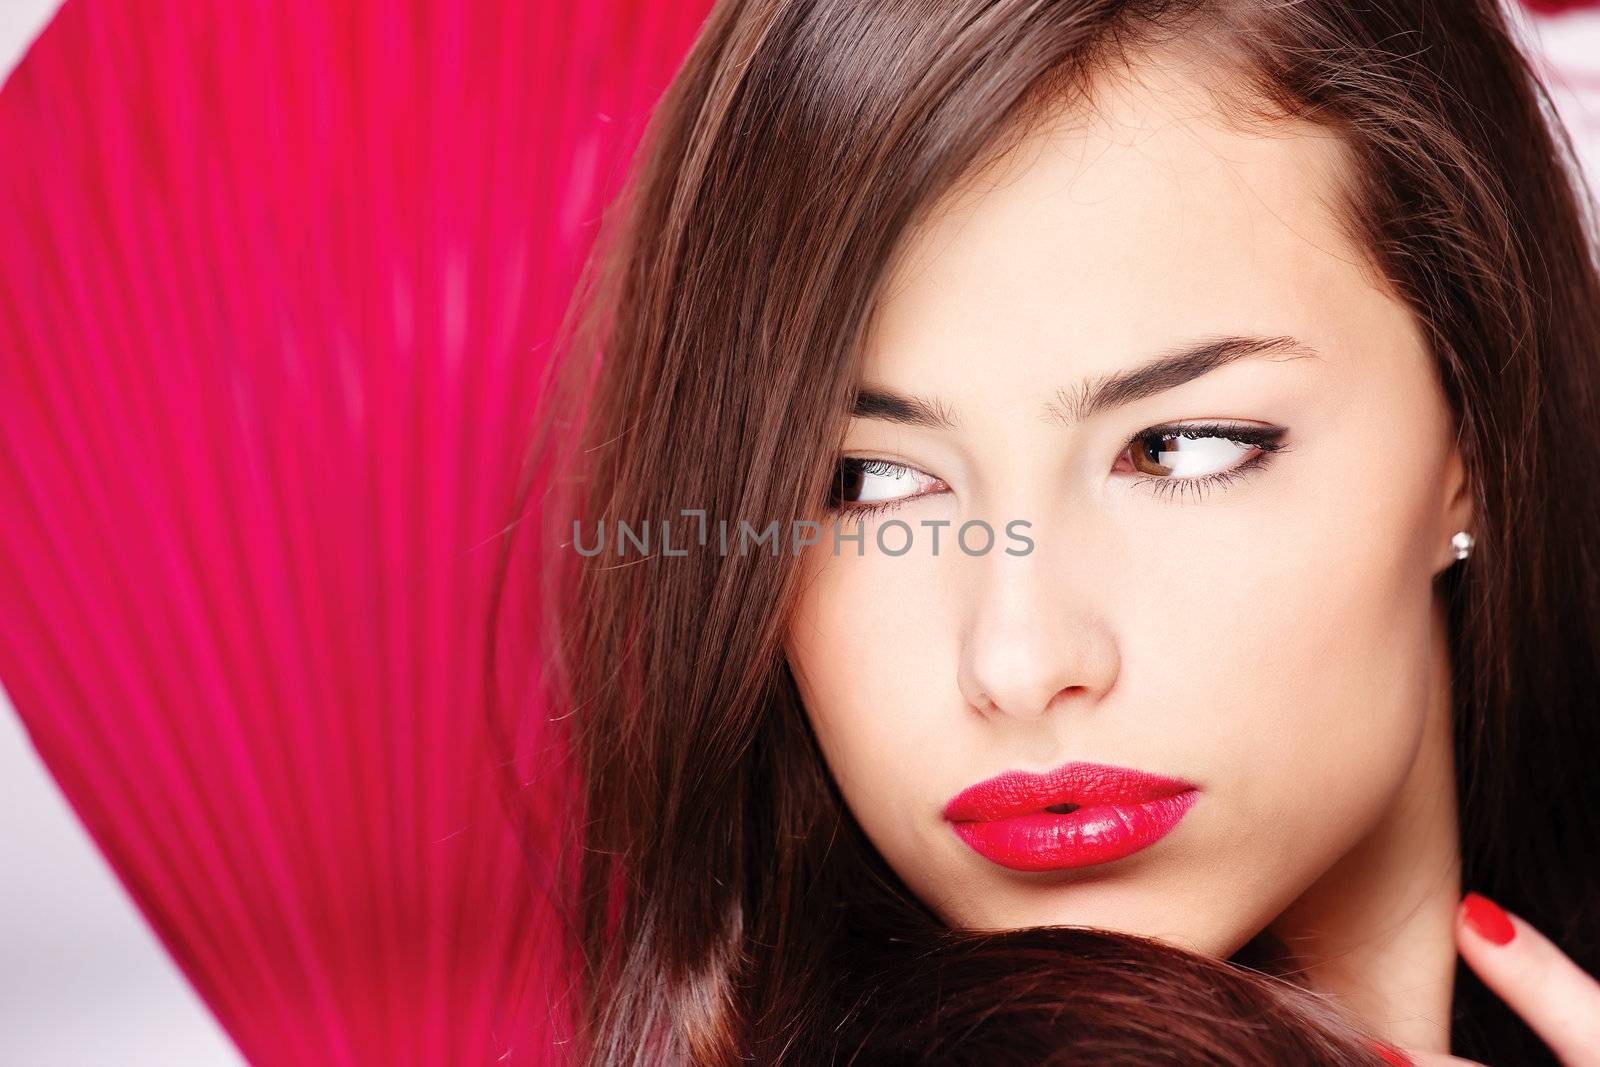 Pretty lady with big red lips in front of a red fan